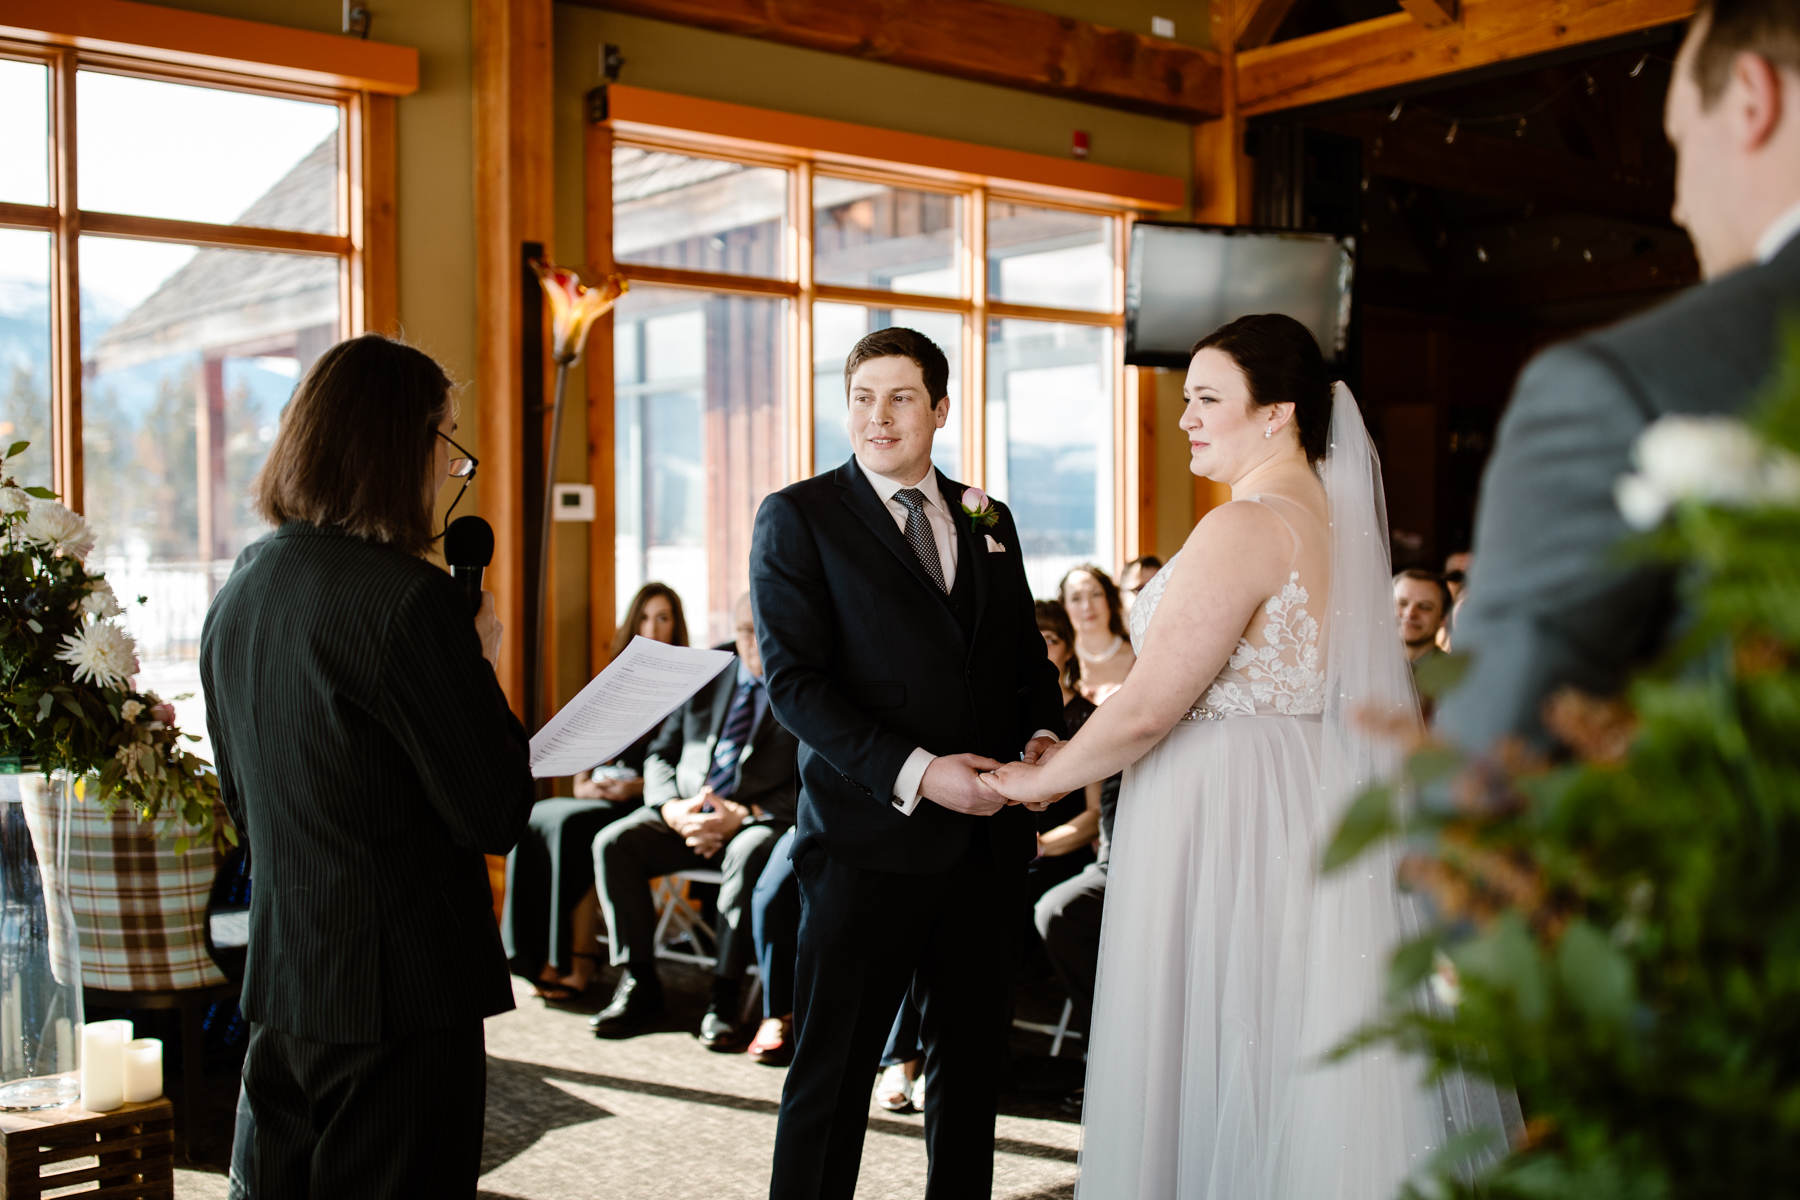 Invermere Wedding Photographers at Eagle Ranch and Panorama Ski Resort - Image 27